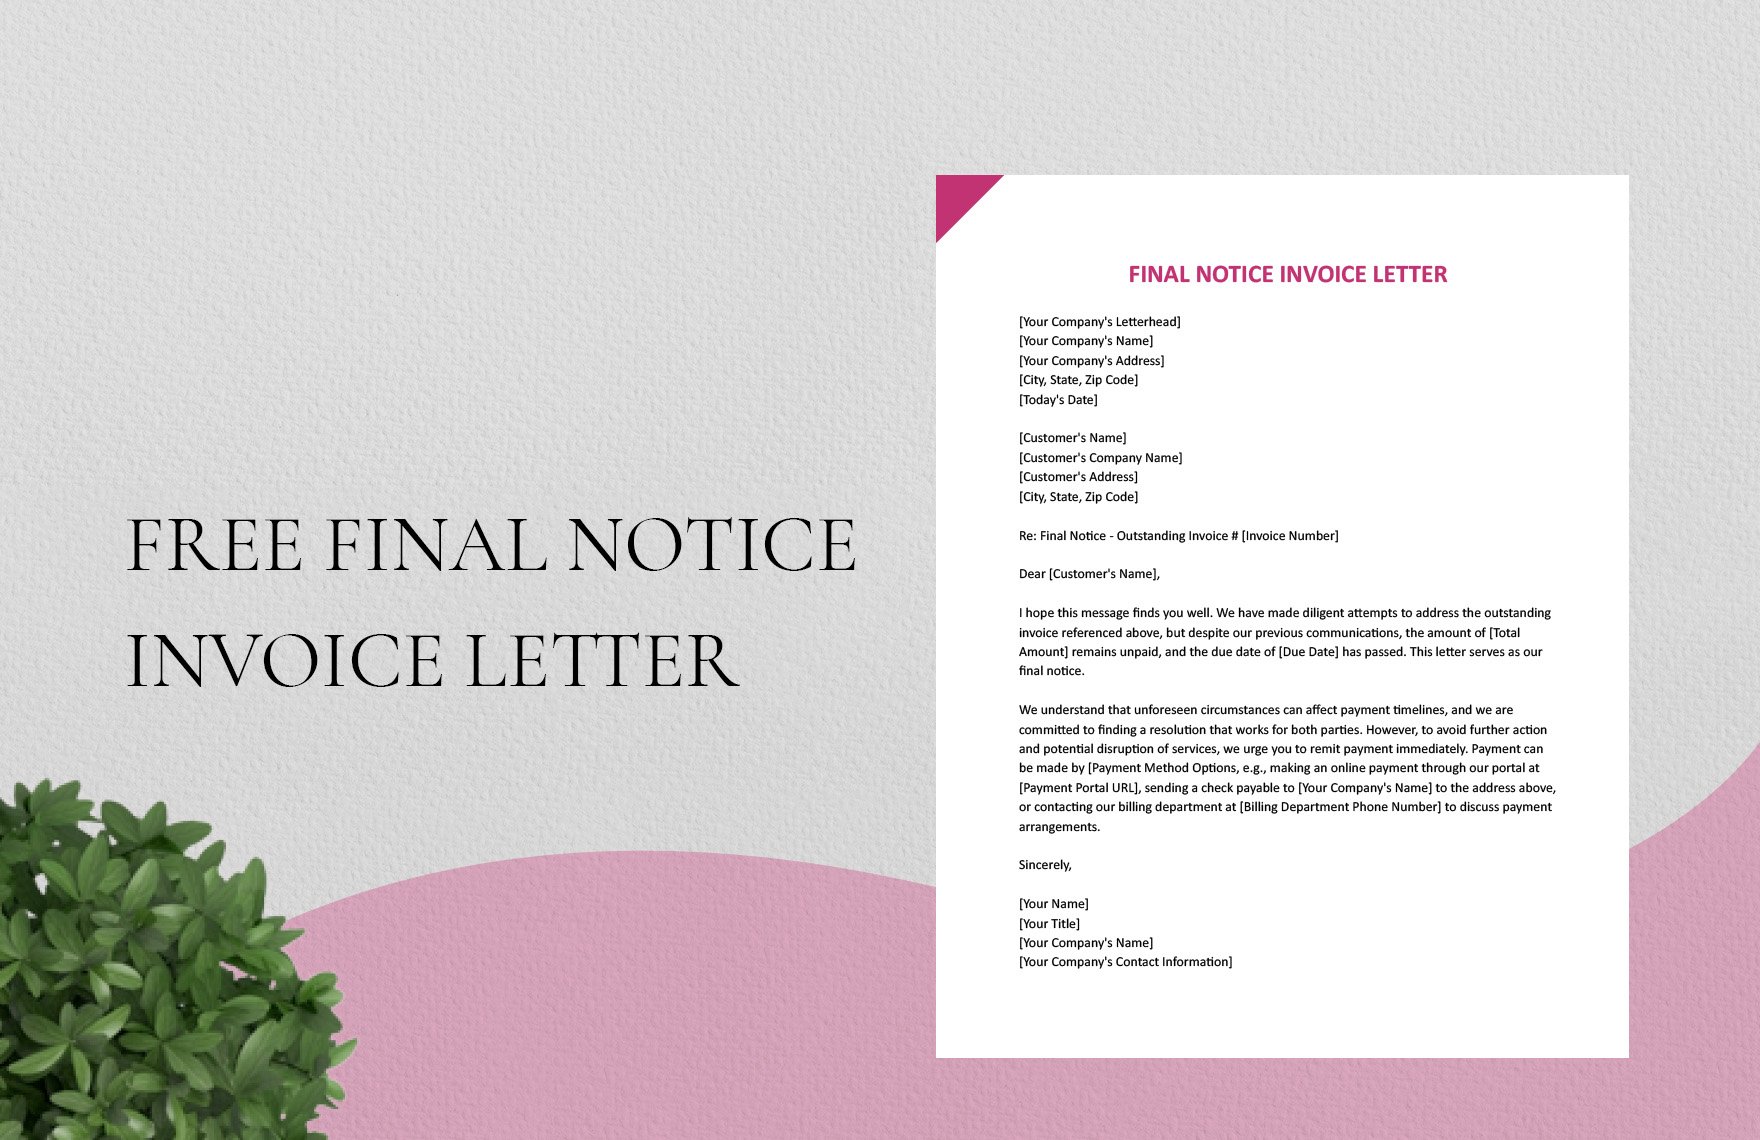 Final Notice Invoice Letter